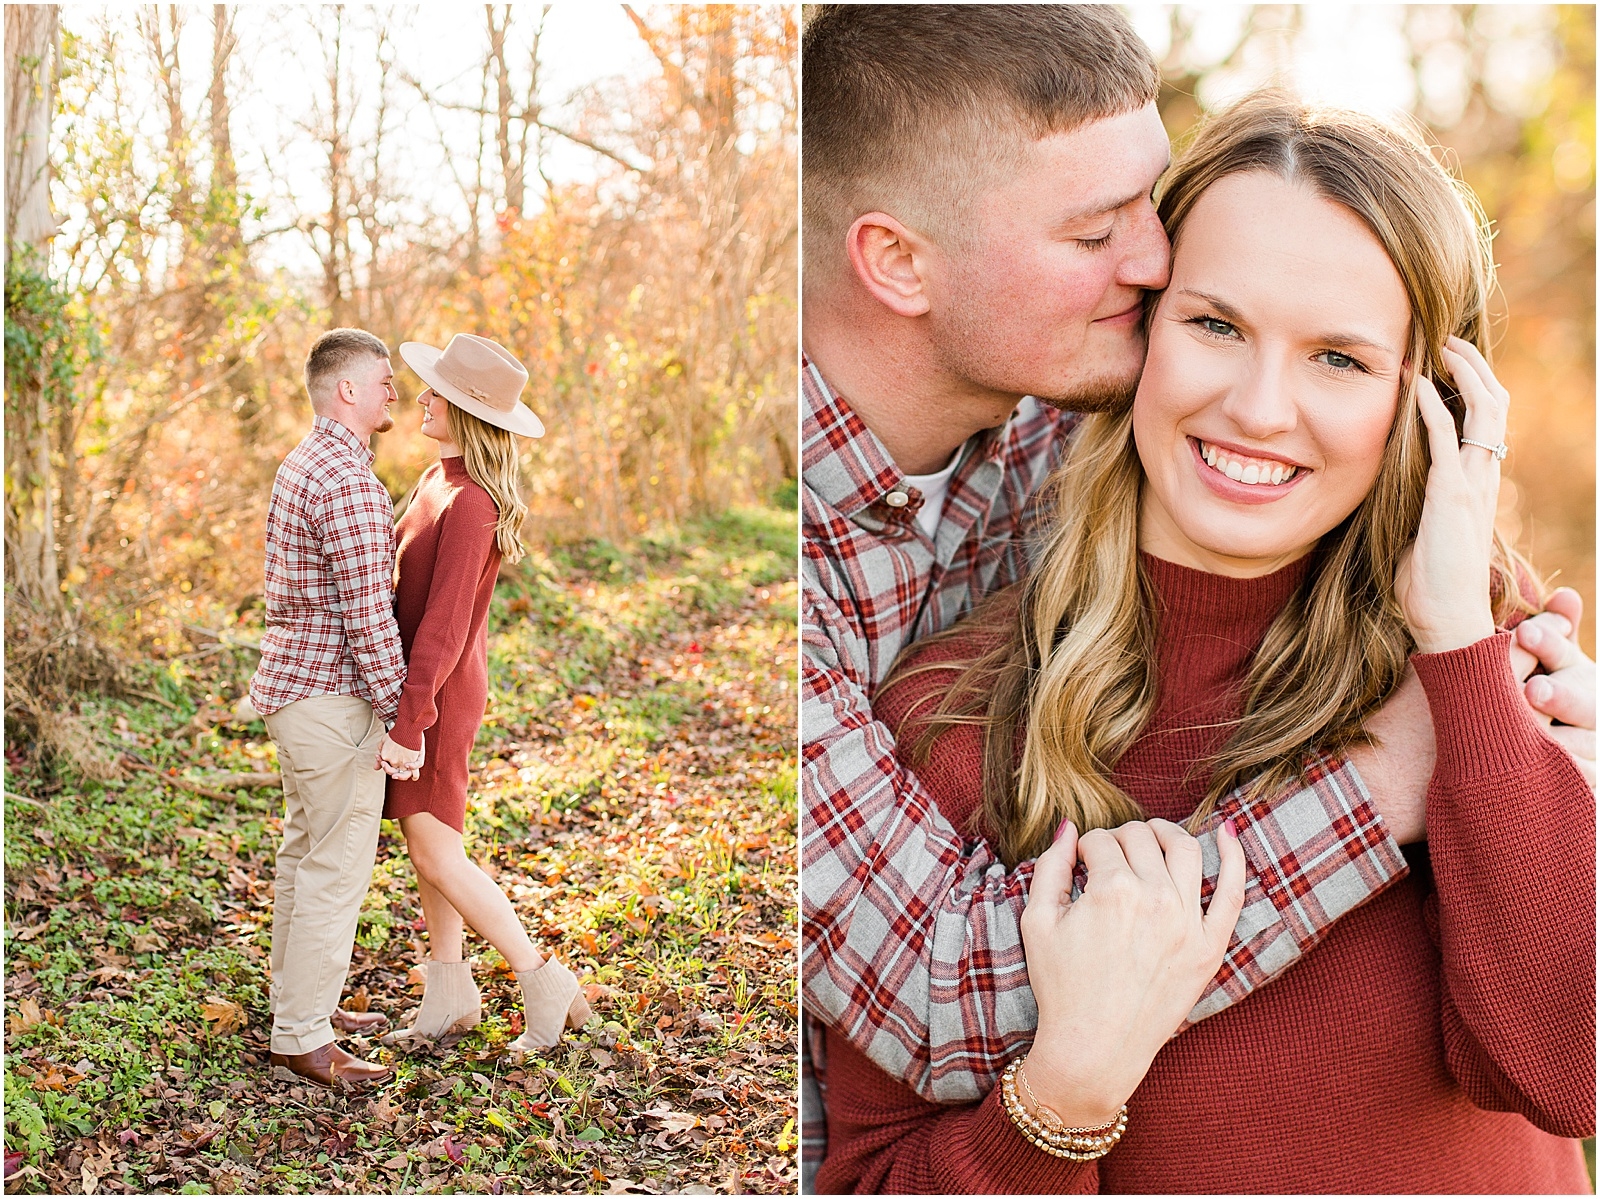 A Fall Southern Indiana Engagement Seesion | Cody and Hannah | Bret and Brandie Photography 016.jpg